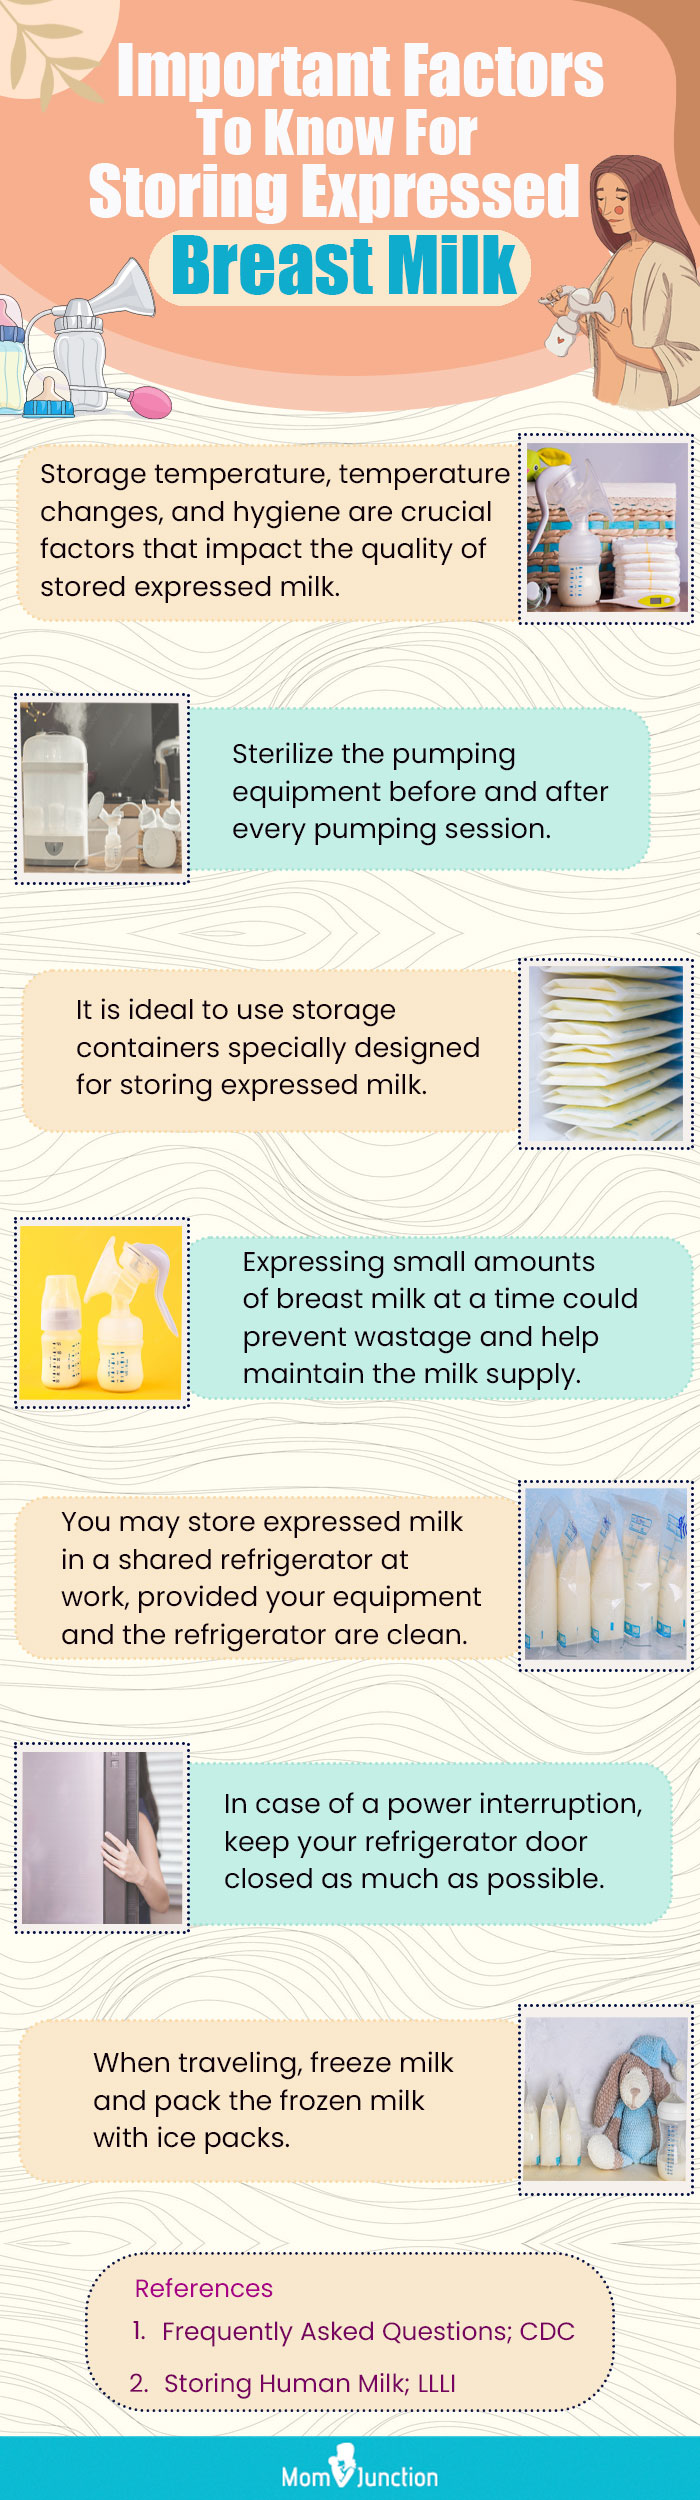 important factors to know for storing expressed breast milk (infographic)